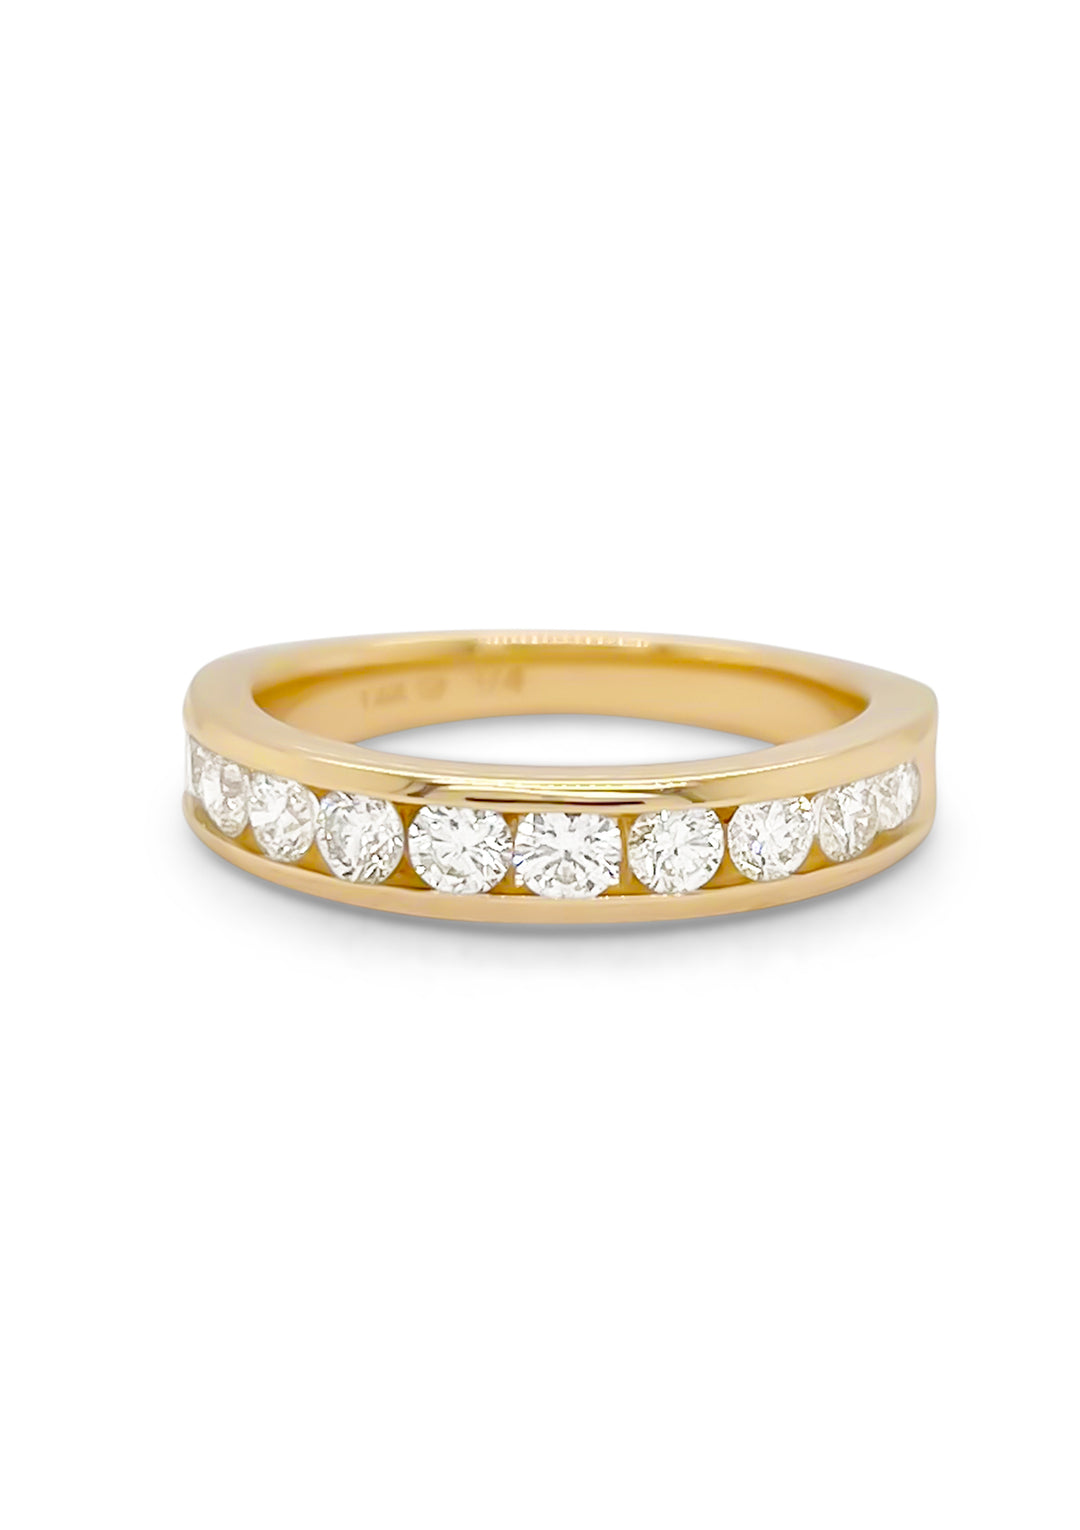 14K Yellow Gold .75cttw Diamond Channel Band